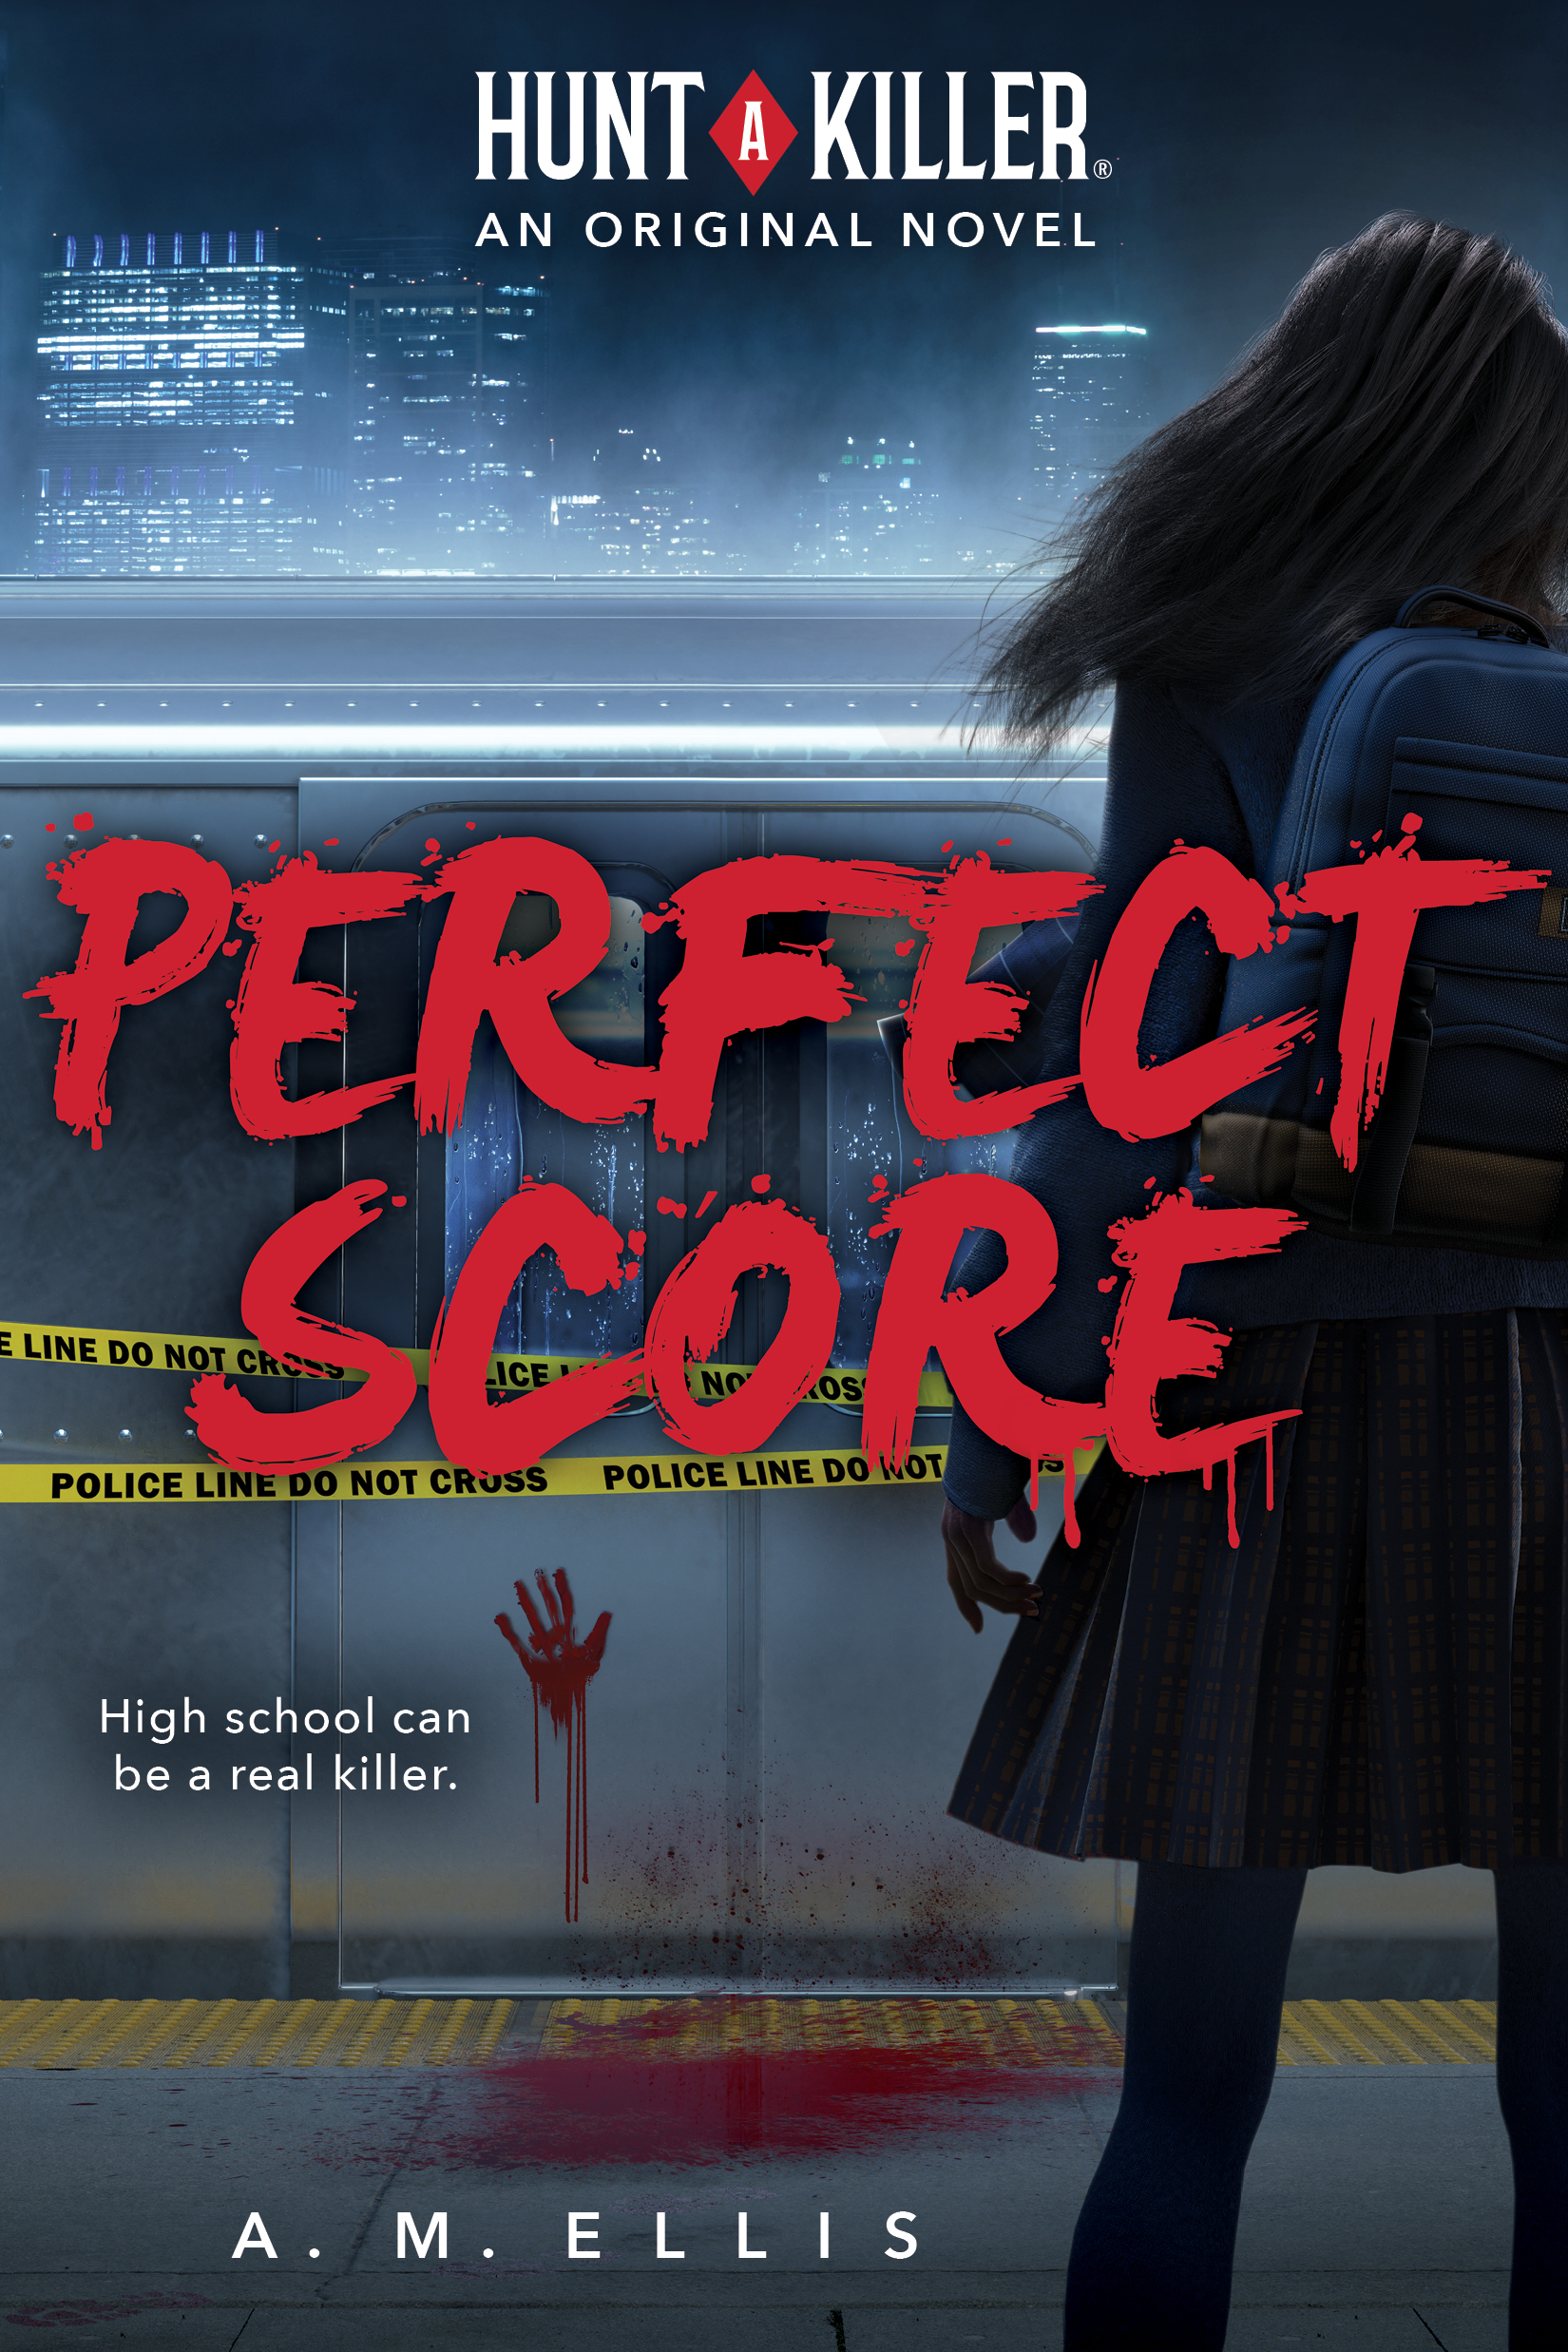 SCHOLASTIC AND IMMERSIVE ENTERTAINMENT COMPANY HUNT A KILLER SIGN BOOK DEAL  FOR YOUNG ADULT MYSTERIES